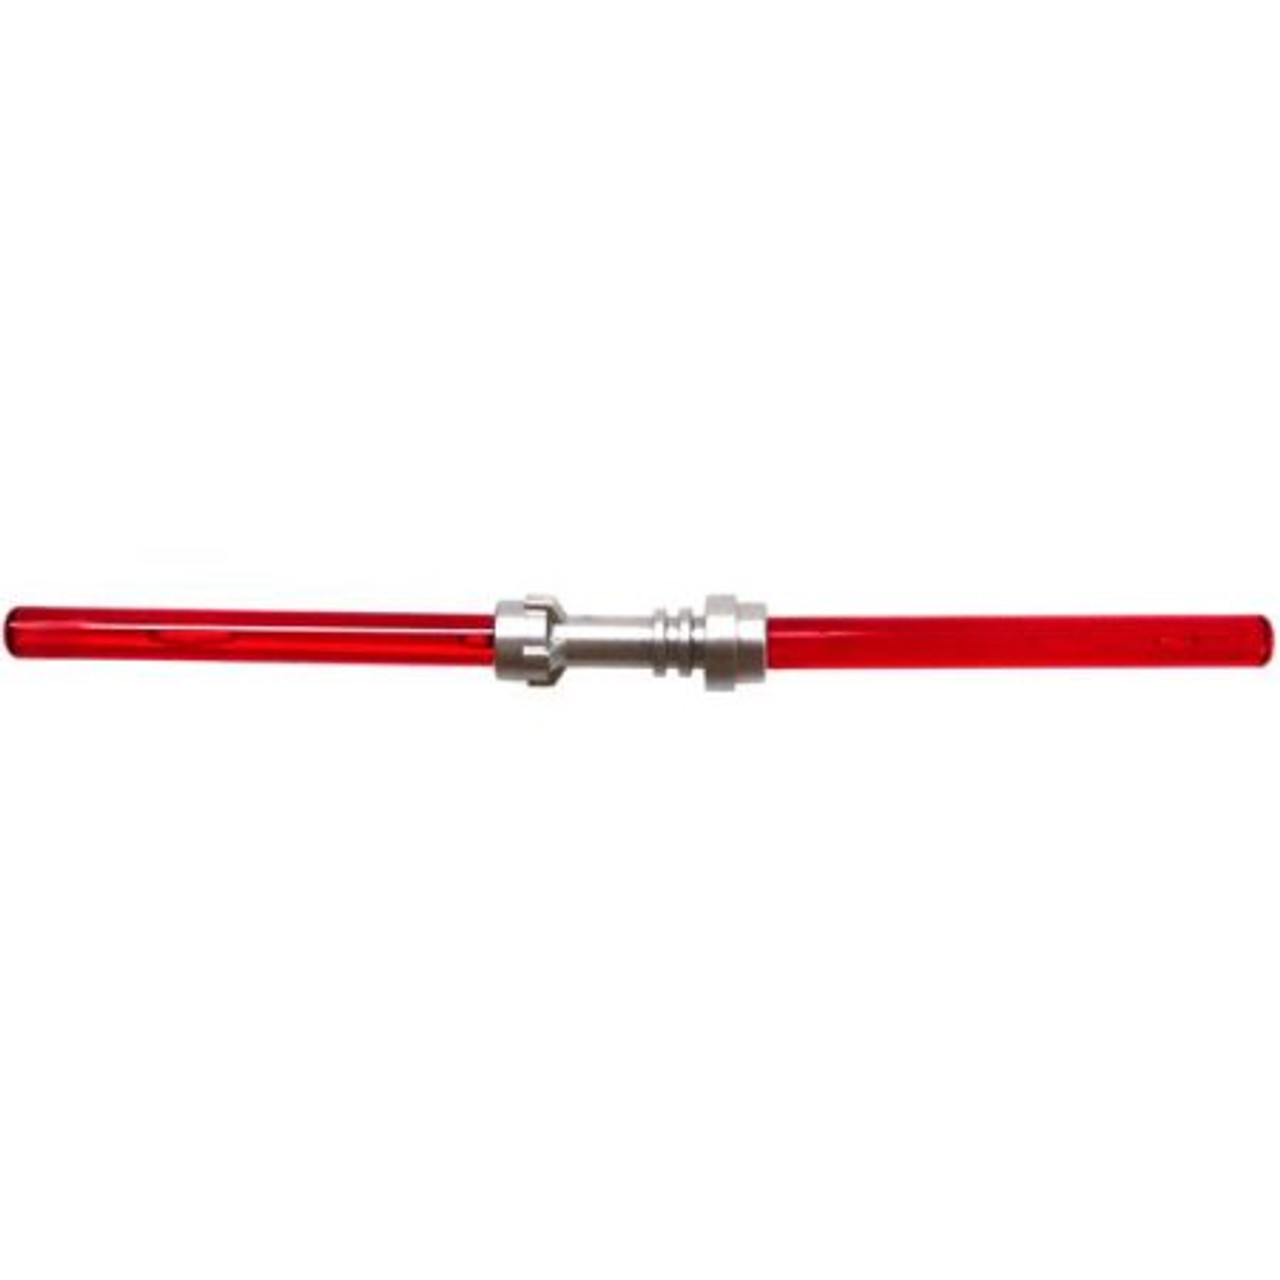 ☀️NEW Lego Weapon Trans Red LIGHTSABER STAR WARS Silver Dual Darth Maul 